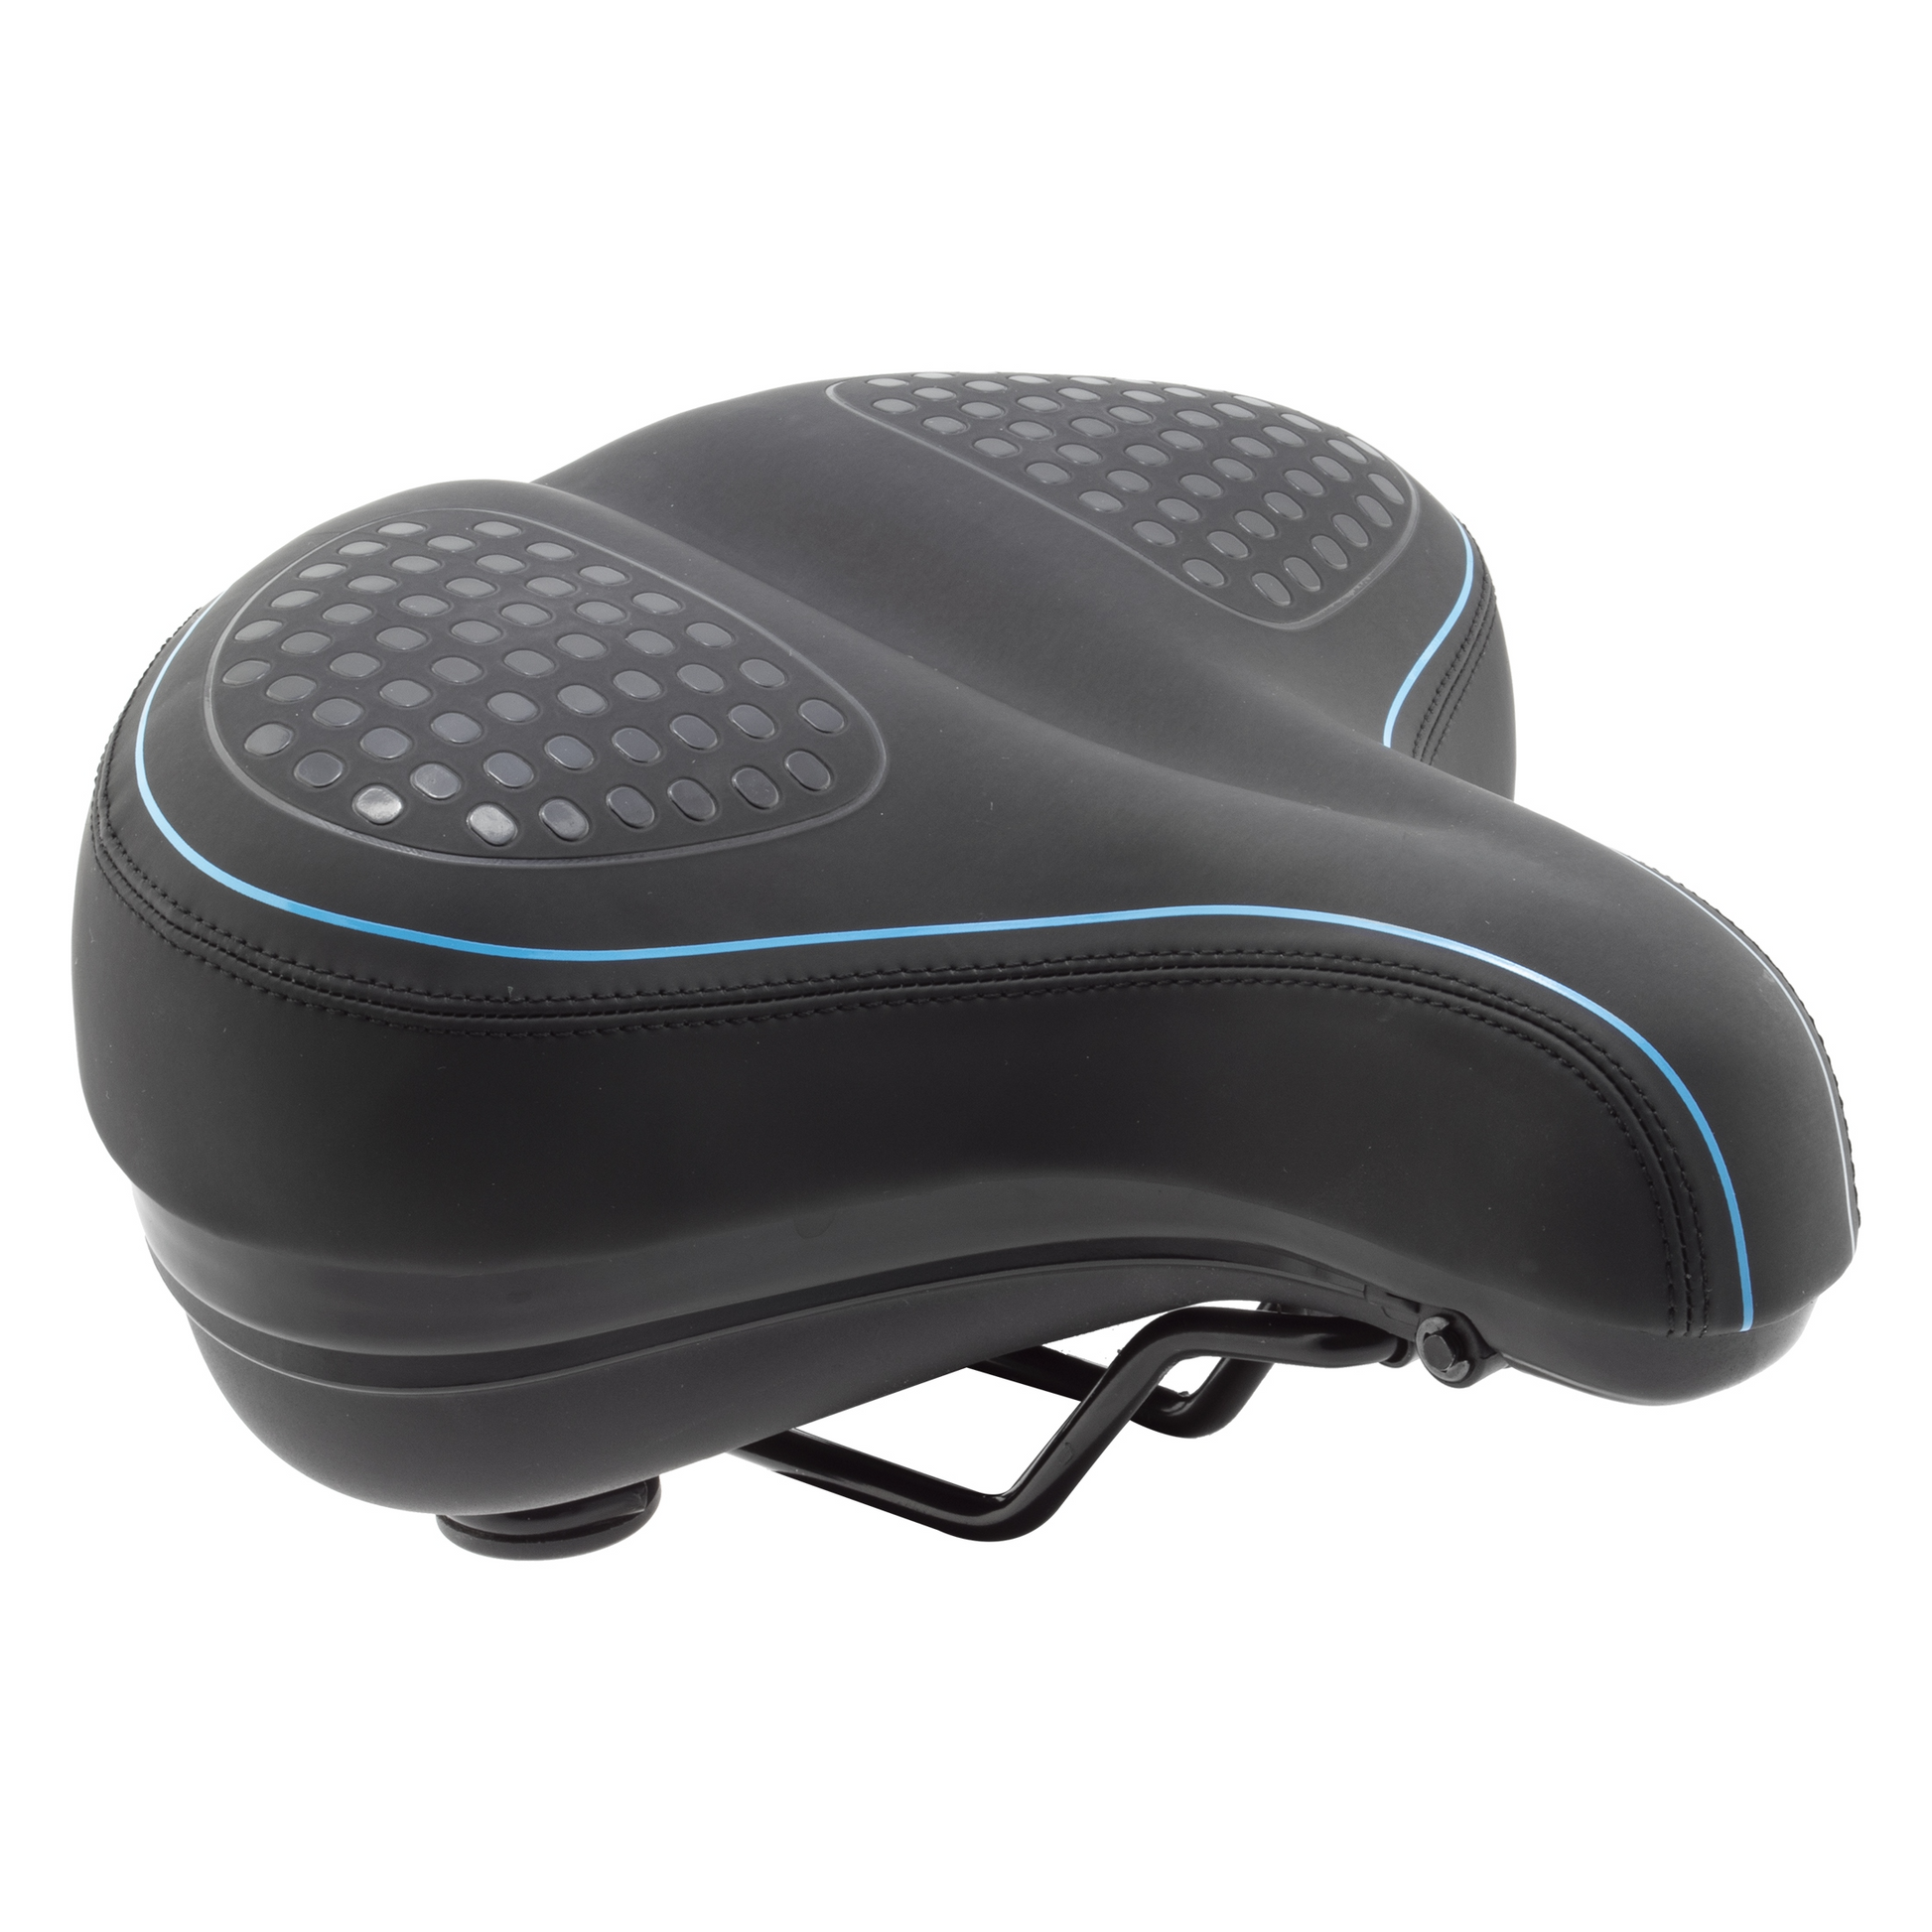 A CLOUD-9 Hideaway black ergonomic cruiser bike seat with blue accents, padded areas for enhanced comfort, and coil spring suspension.